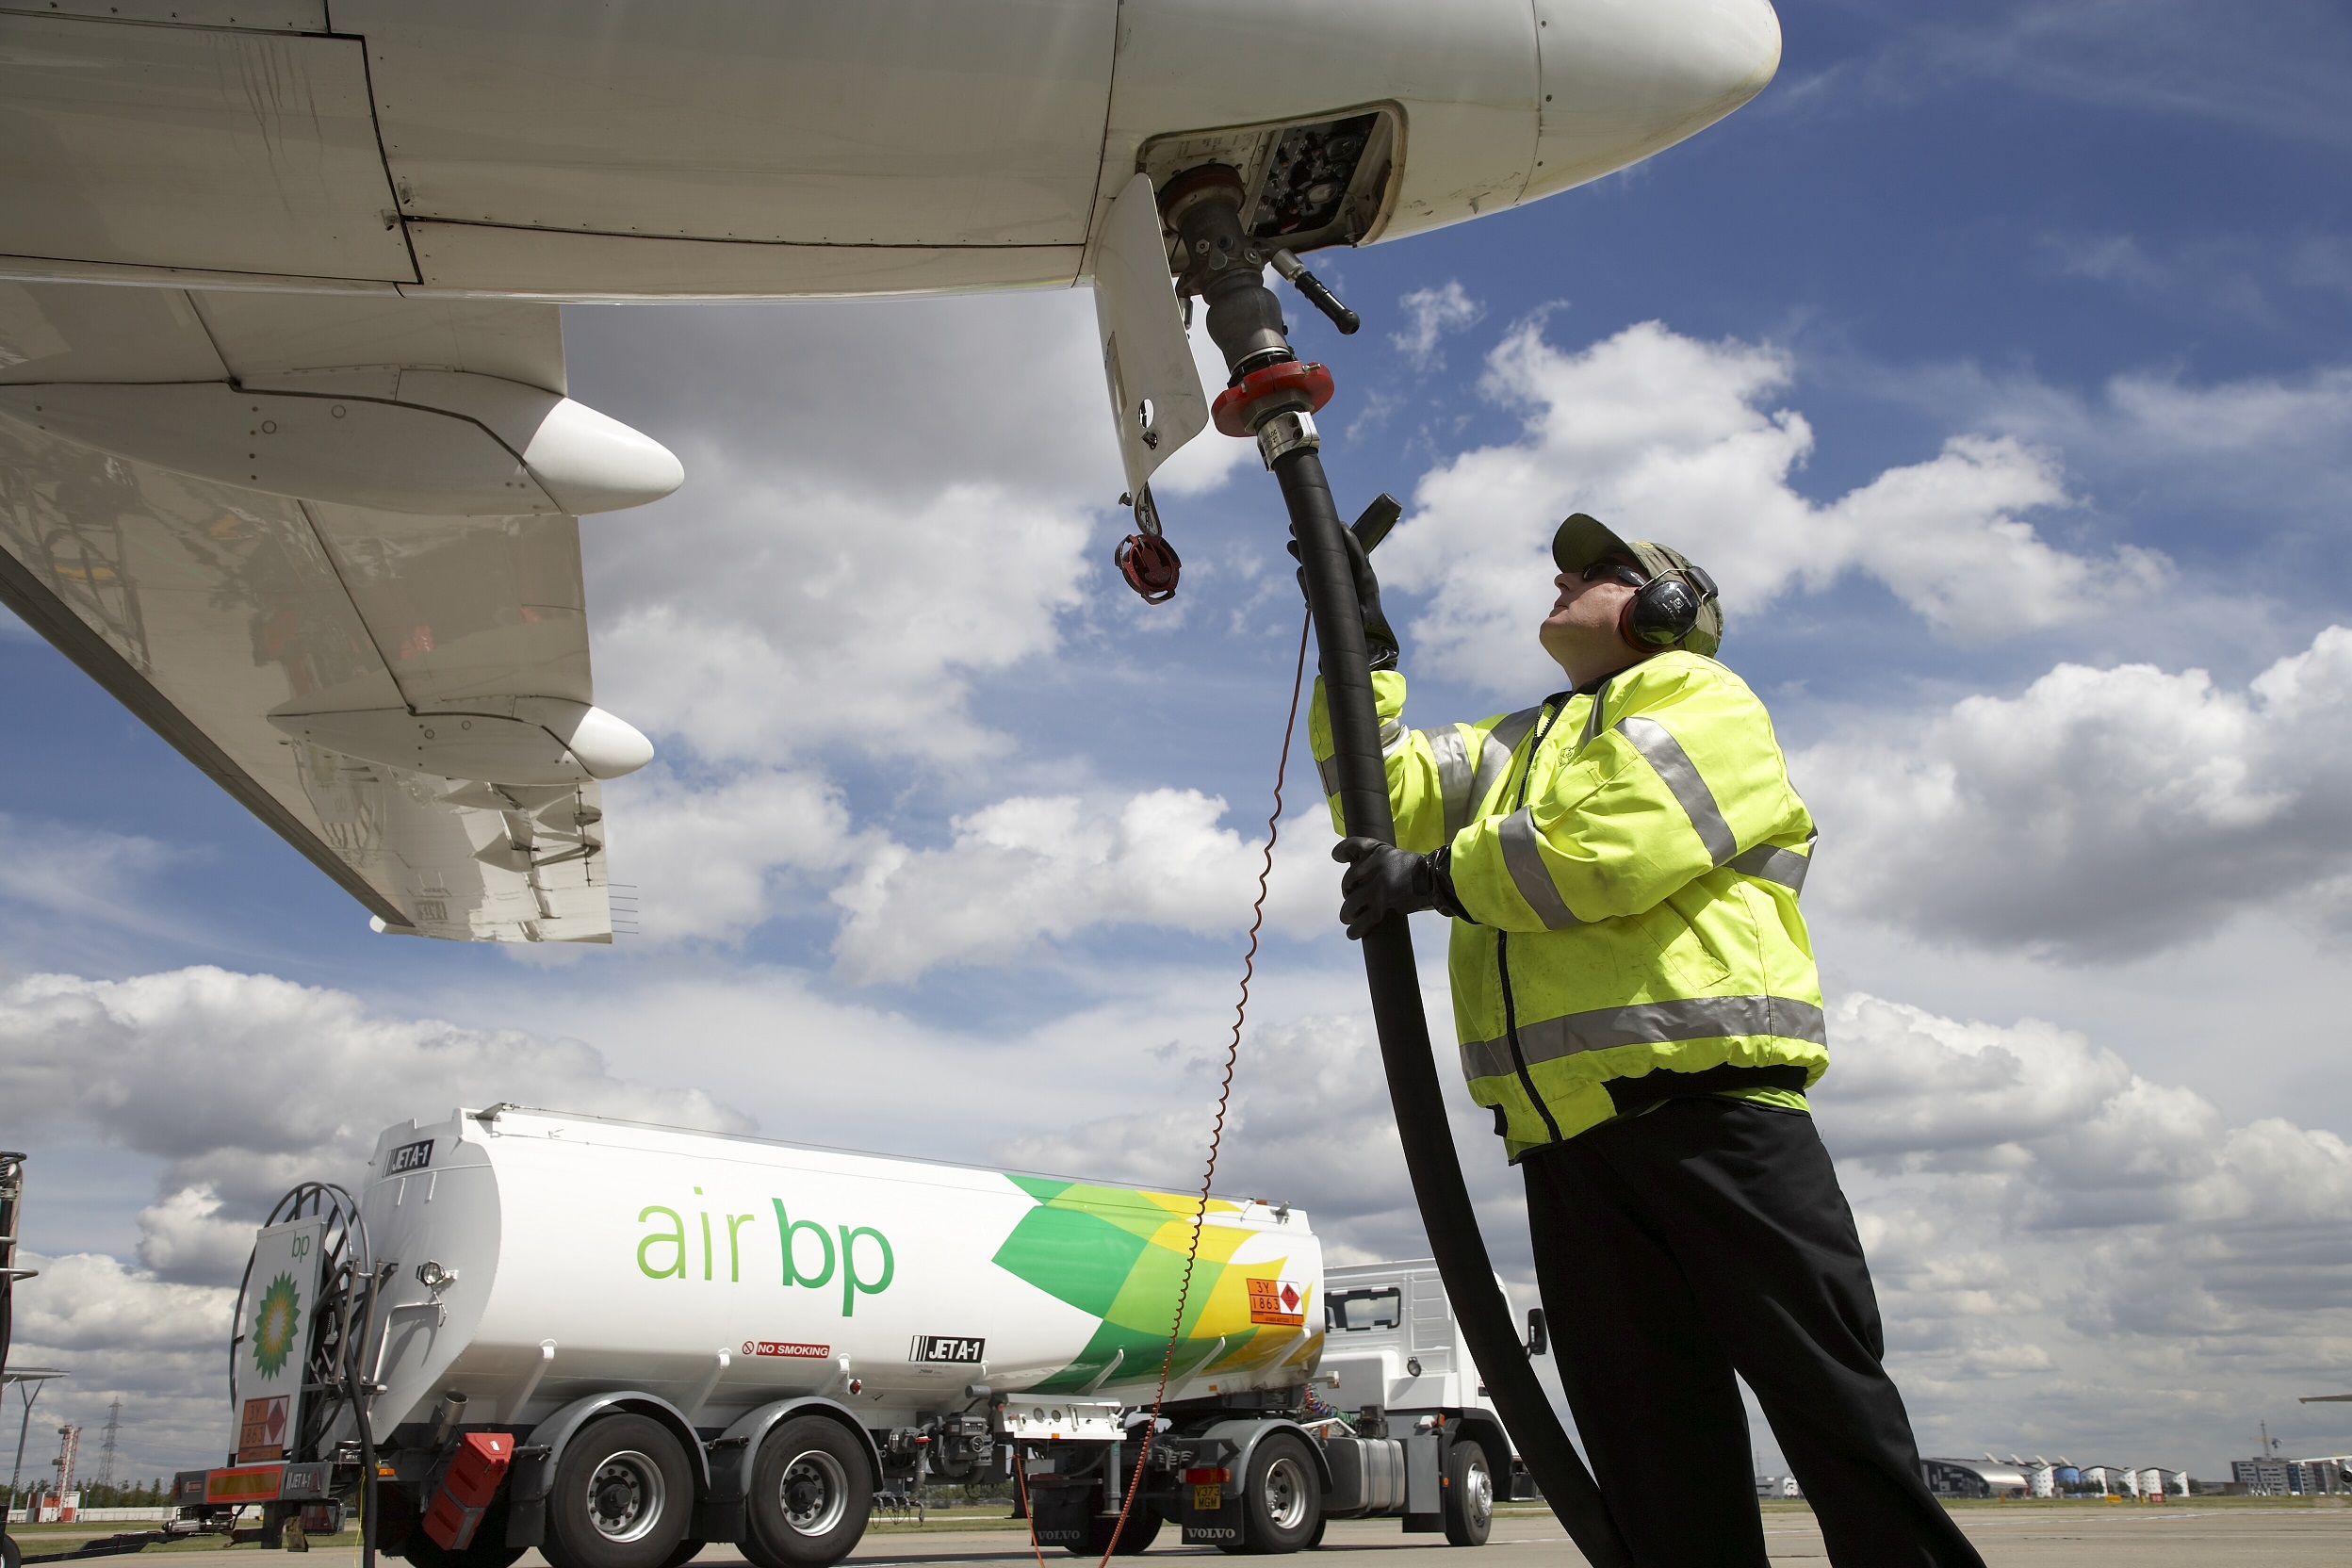 Air bp will make the Neste-produced SAF available at select airports in Europe, with deliveries to airports including Stockholm (ARN) and Oslo (OSL) expected to begin in the coming weeks. Click to enlarge.